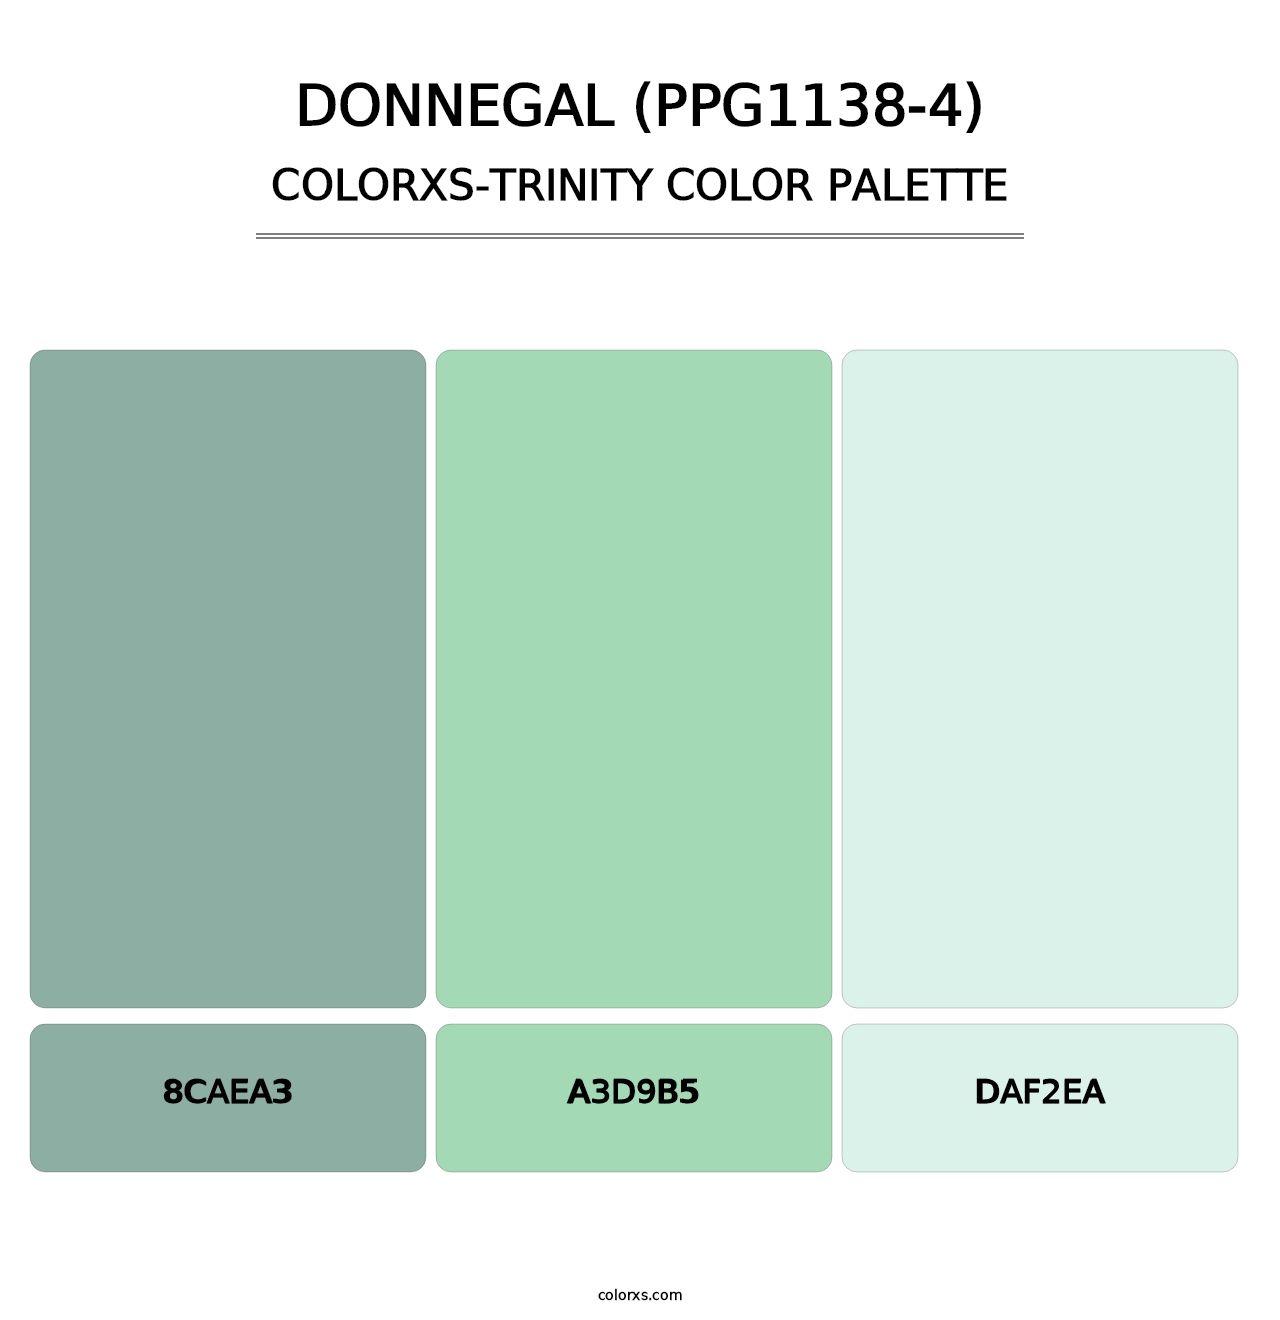 Donnegal (PPG1138-4) - Colorxs Trinity Palette